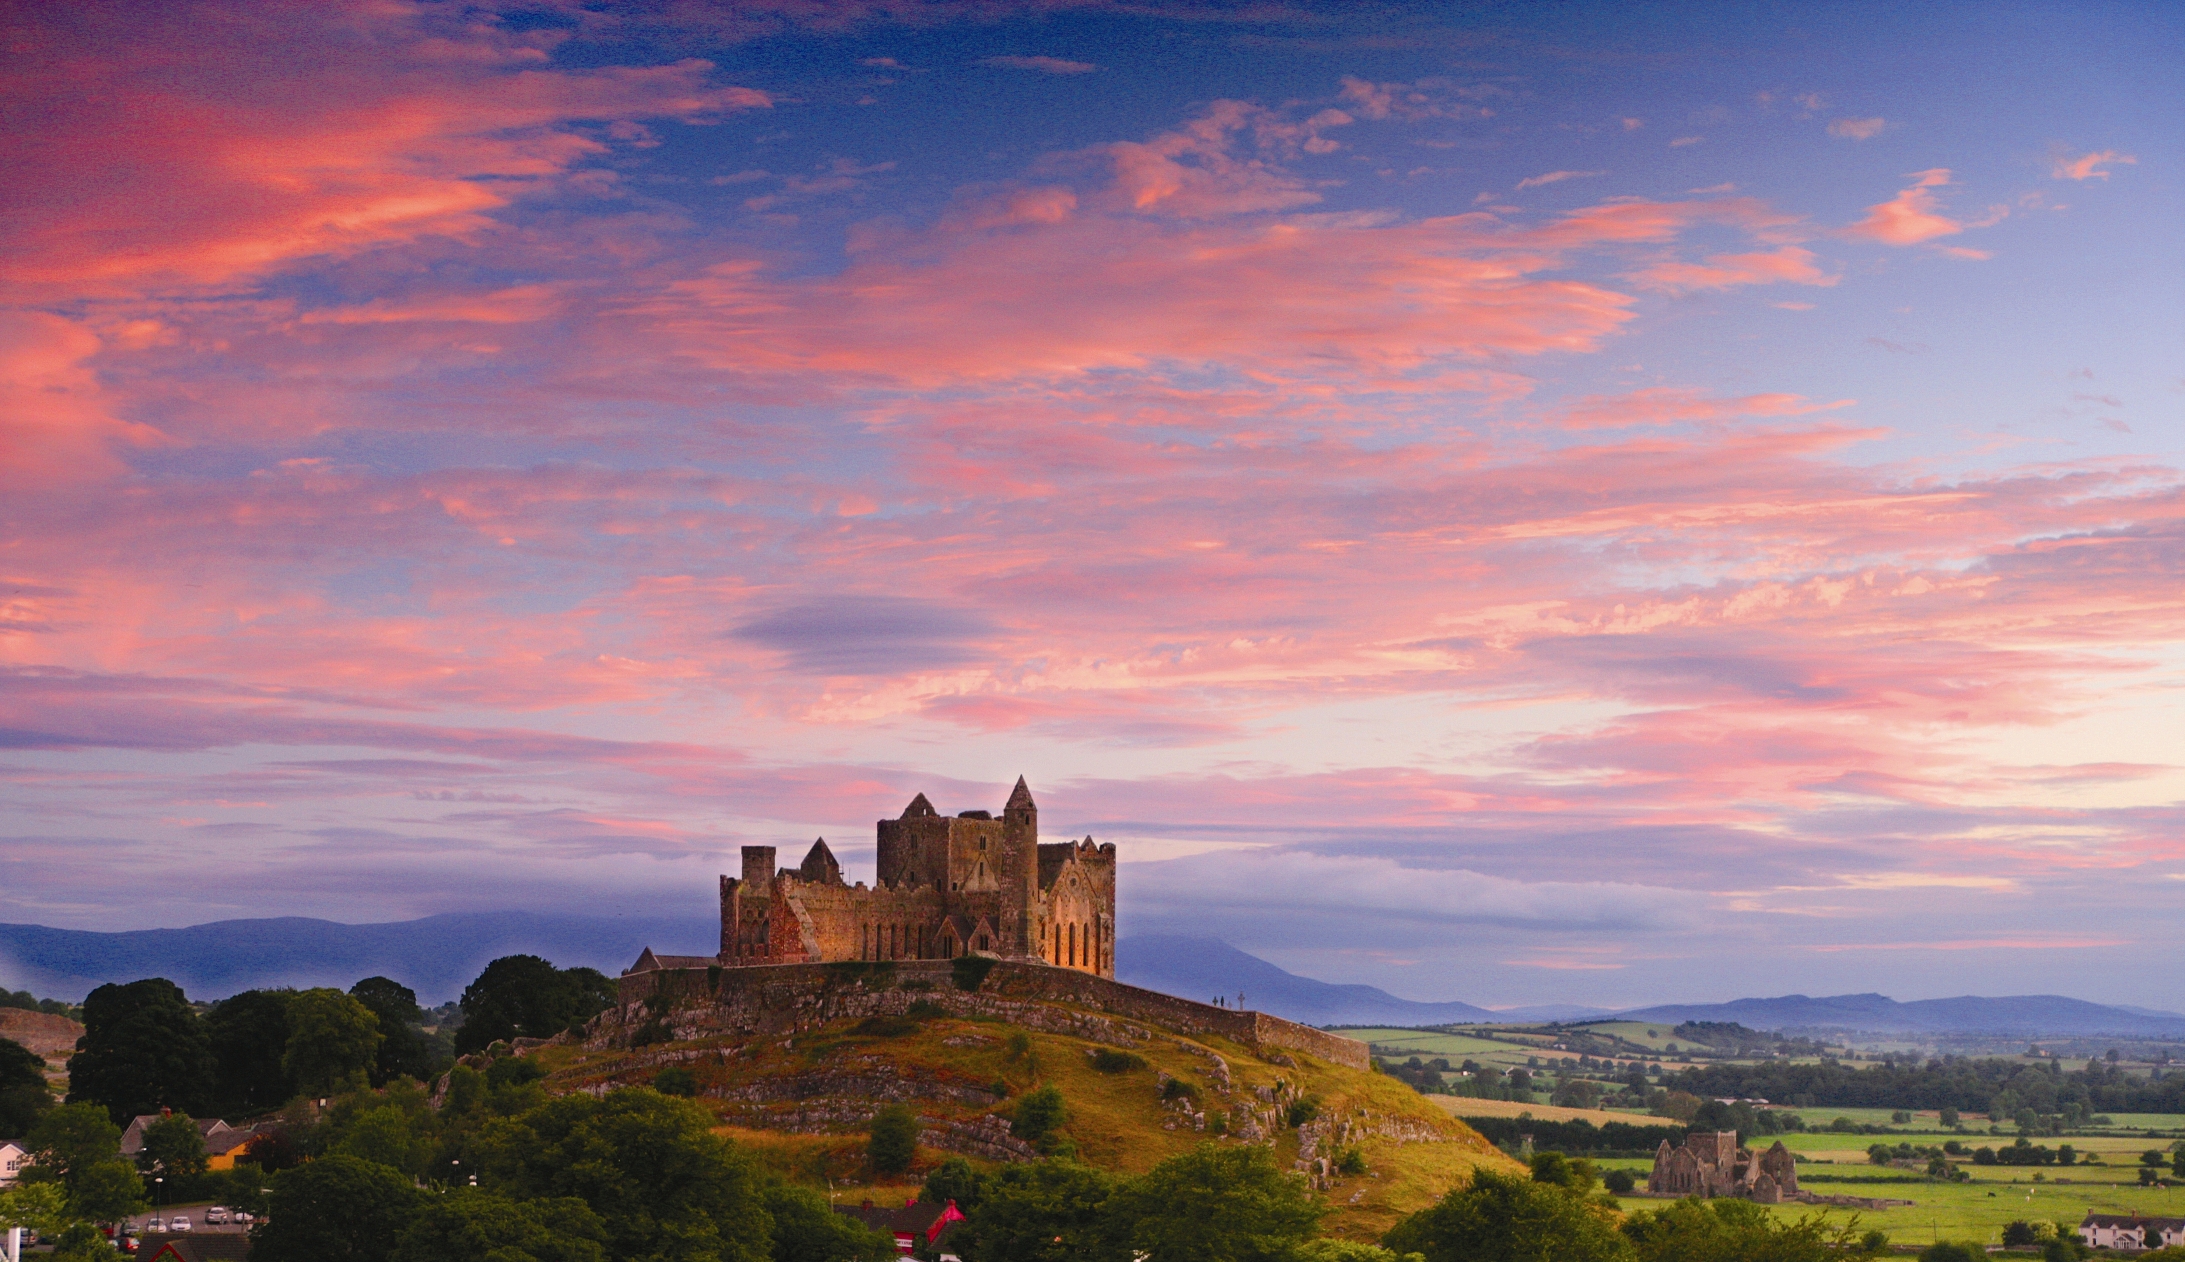 The Ultimate Guide to the Most Beautiful Castles in Ireland